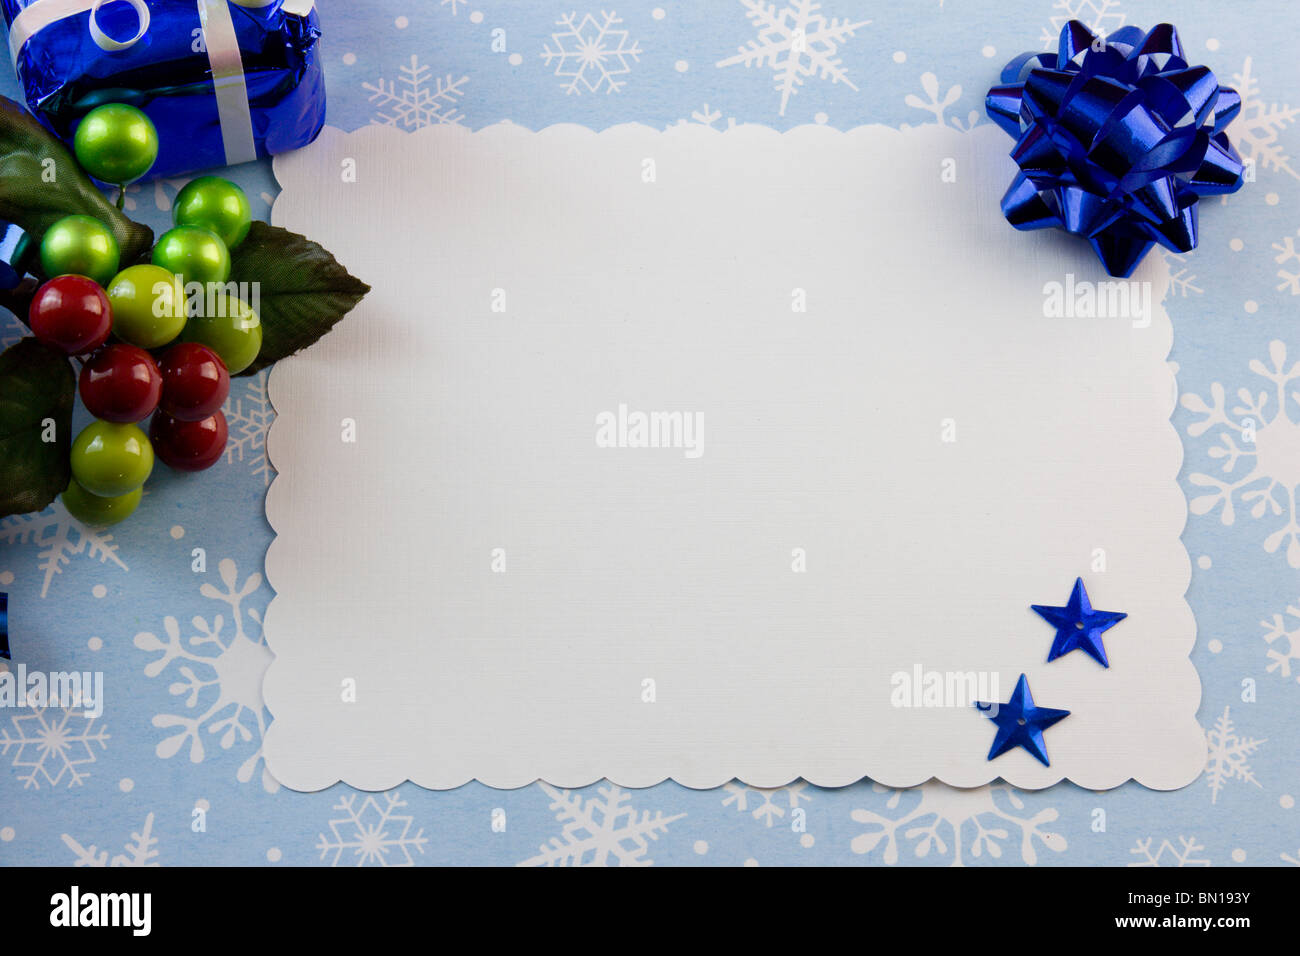 blank Christmas card with blue bow, berry accent on a snowflake background with copyspace Stock Photo